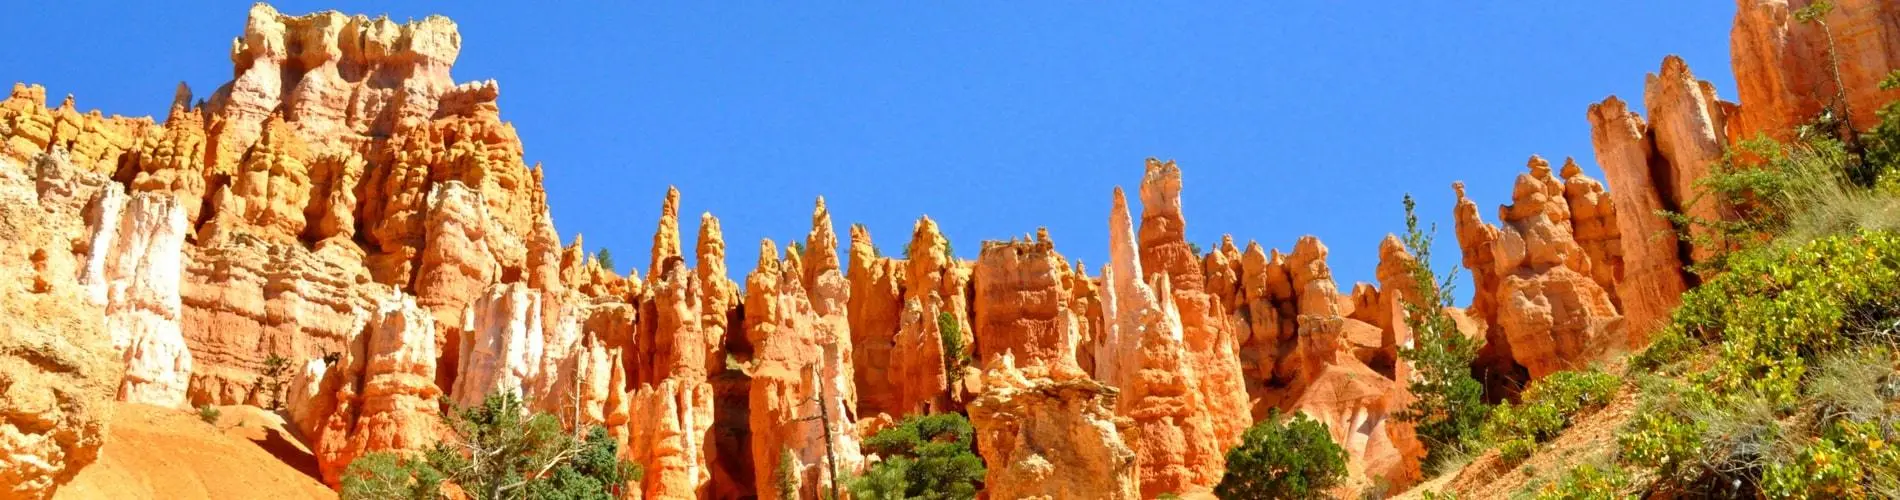 Scenic view of the rock formation in Southern Utah